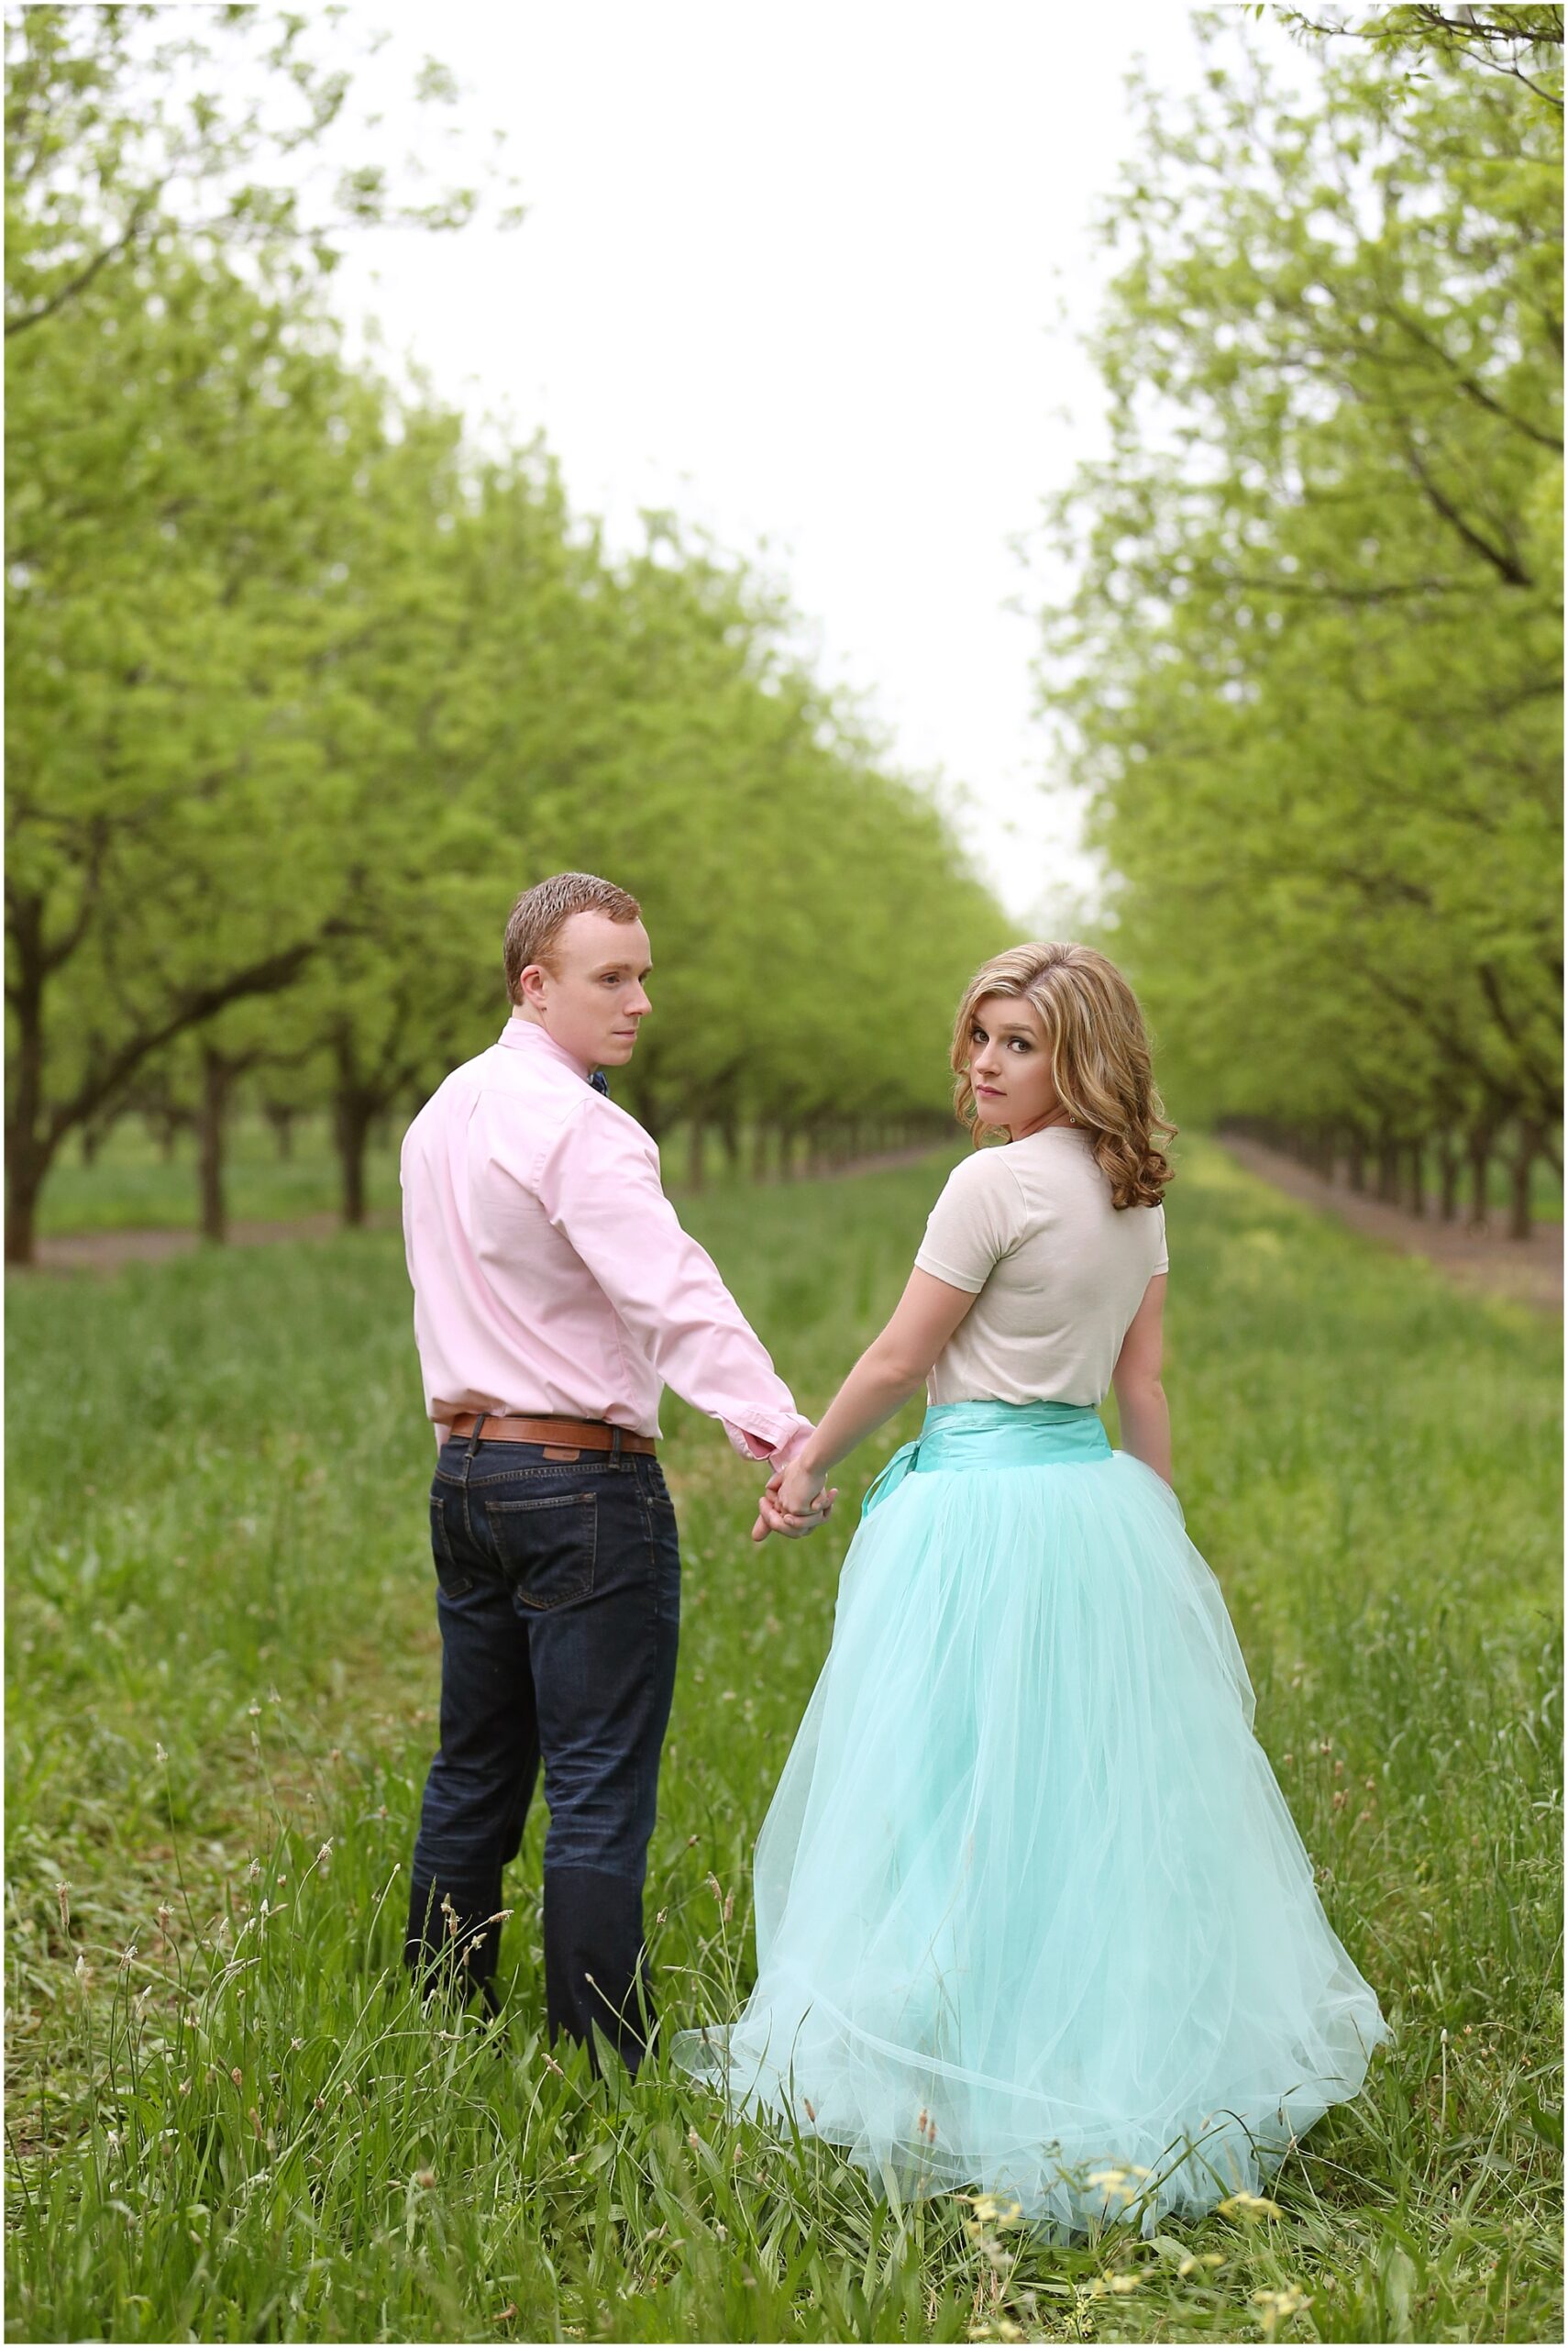 A Bowtie and Tulle Skirt Engagement Session | Two Chics Photography | www.twochicsphotography.com